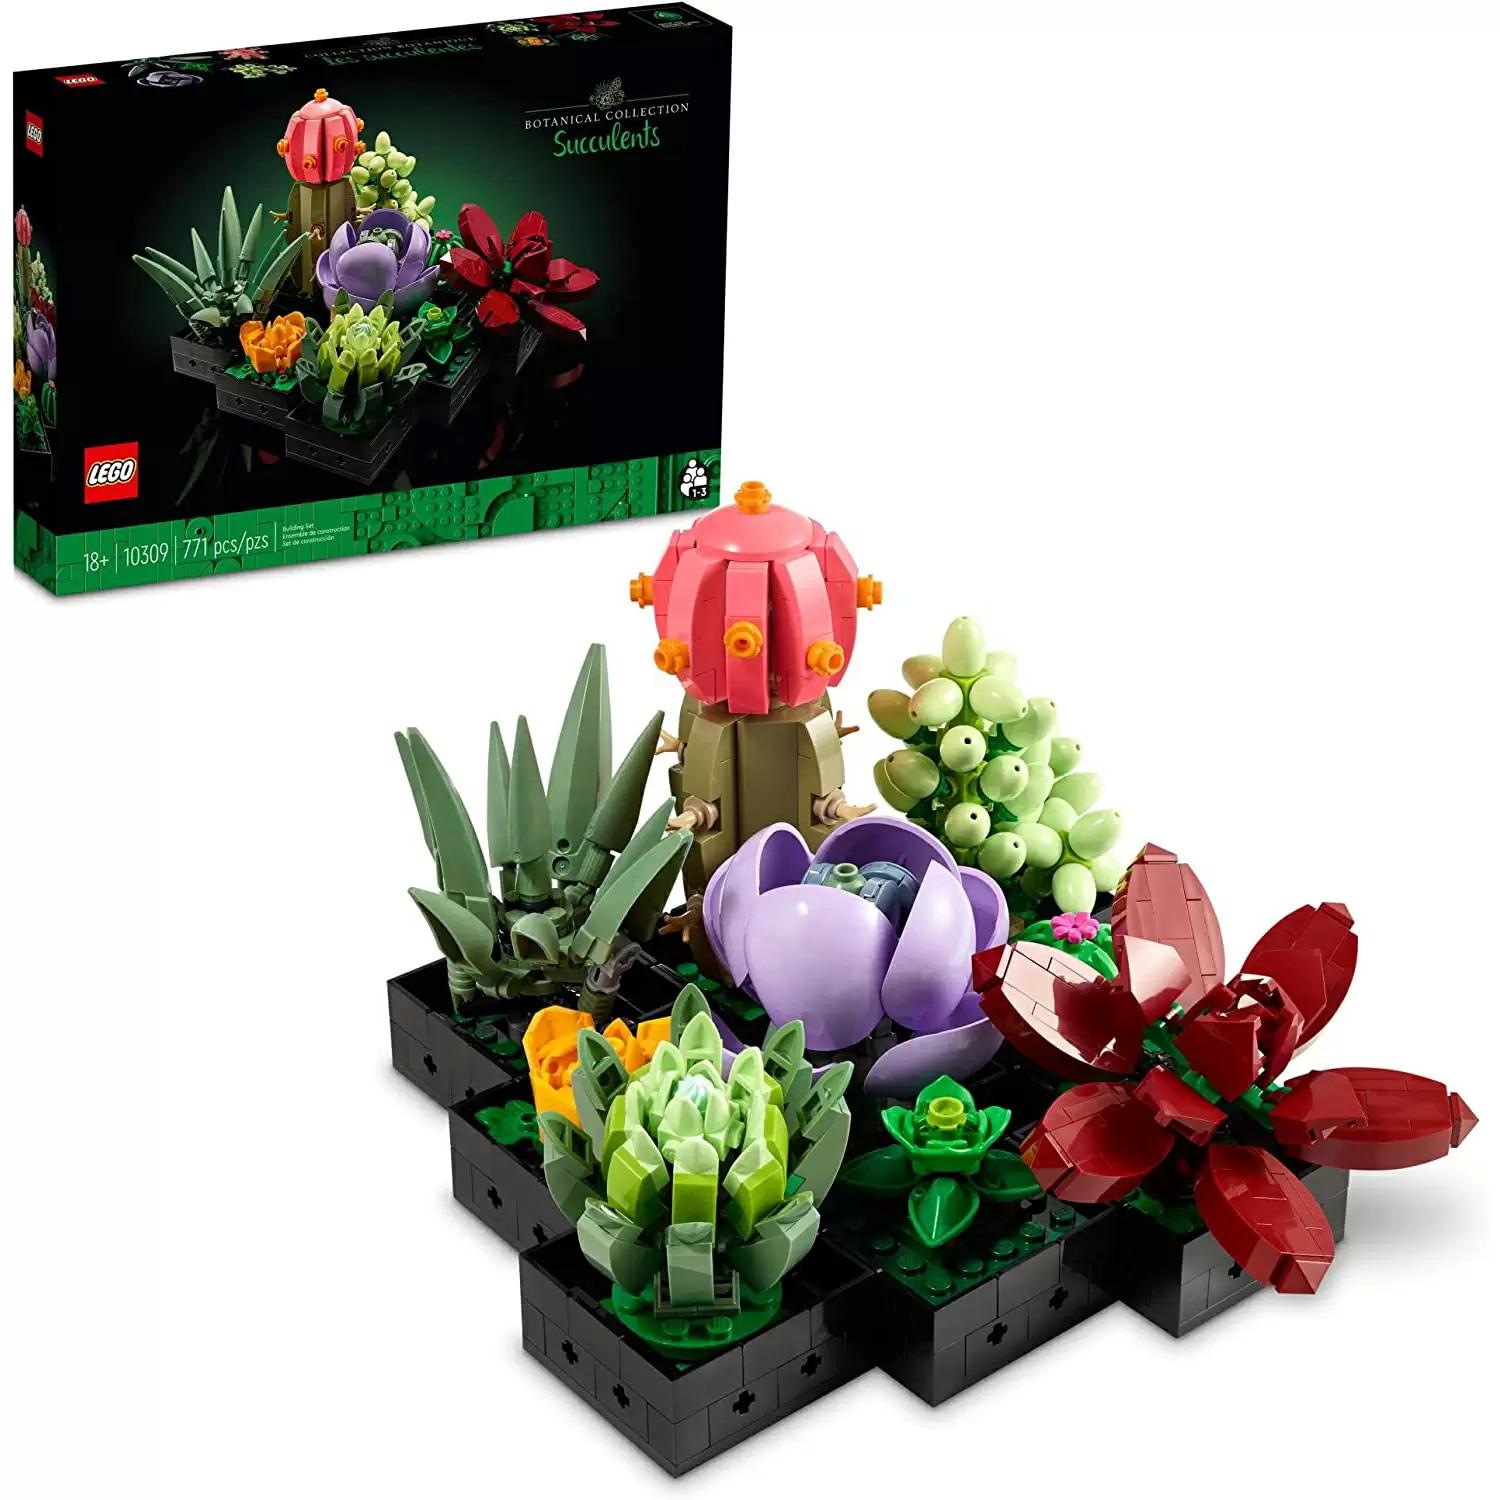 LEGO Icons Succulents Botanical Collection Plant Building Kit for $39.99 Shipped